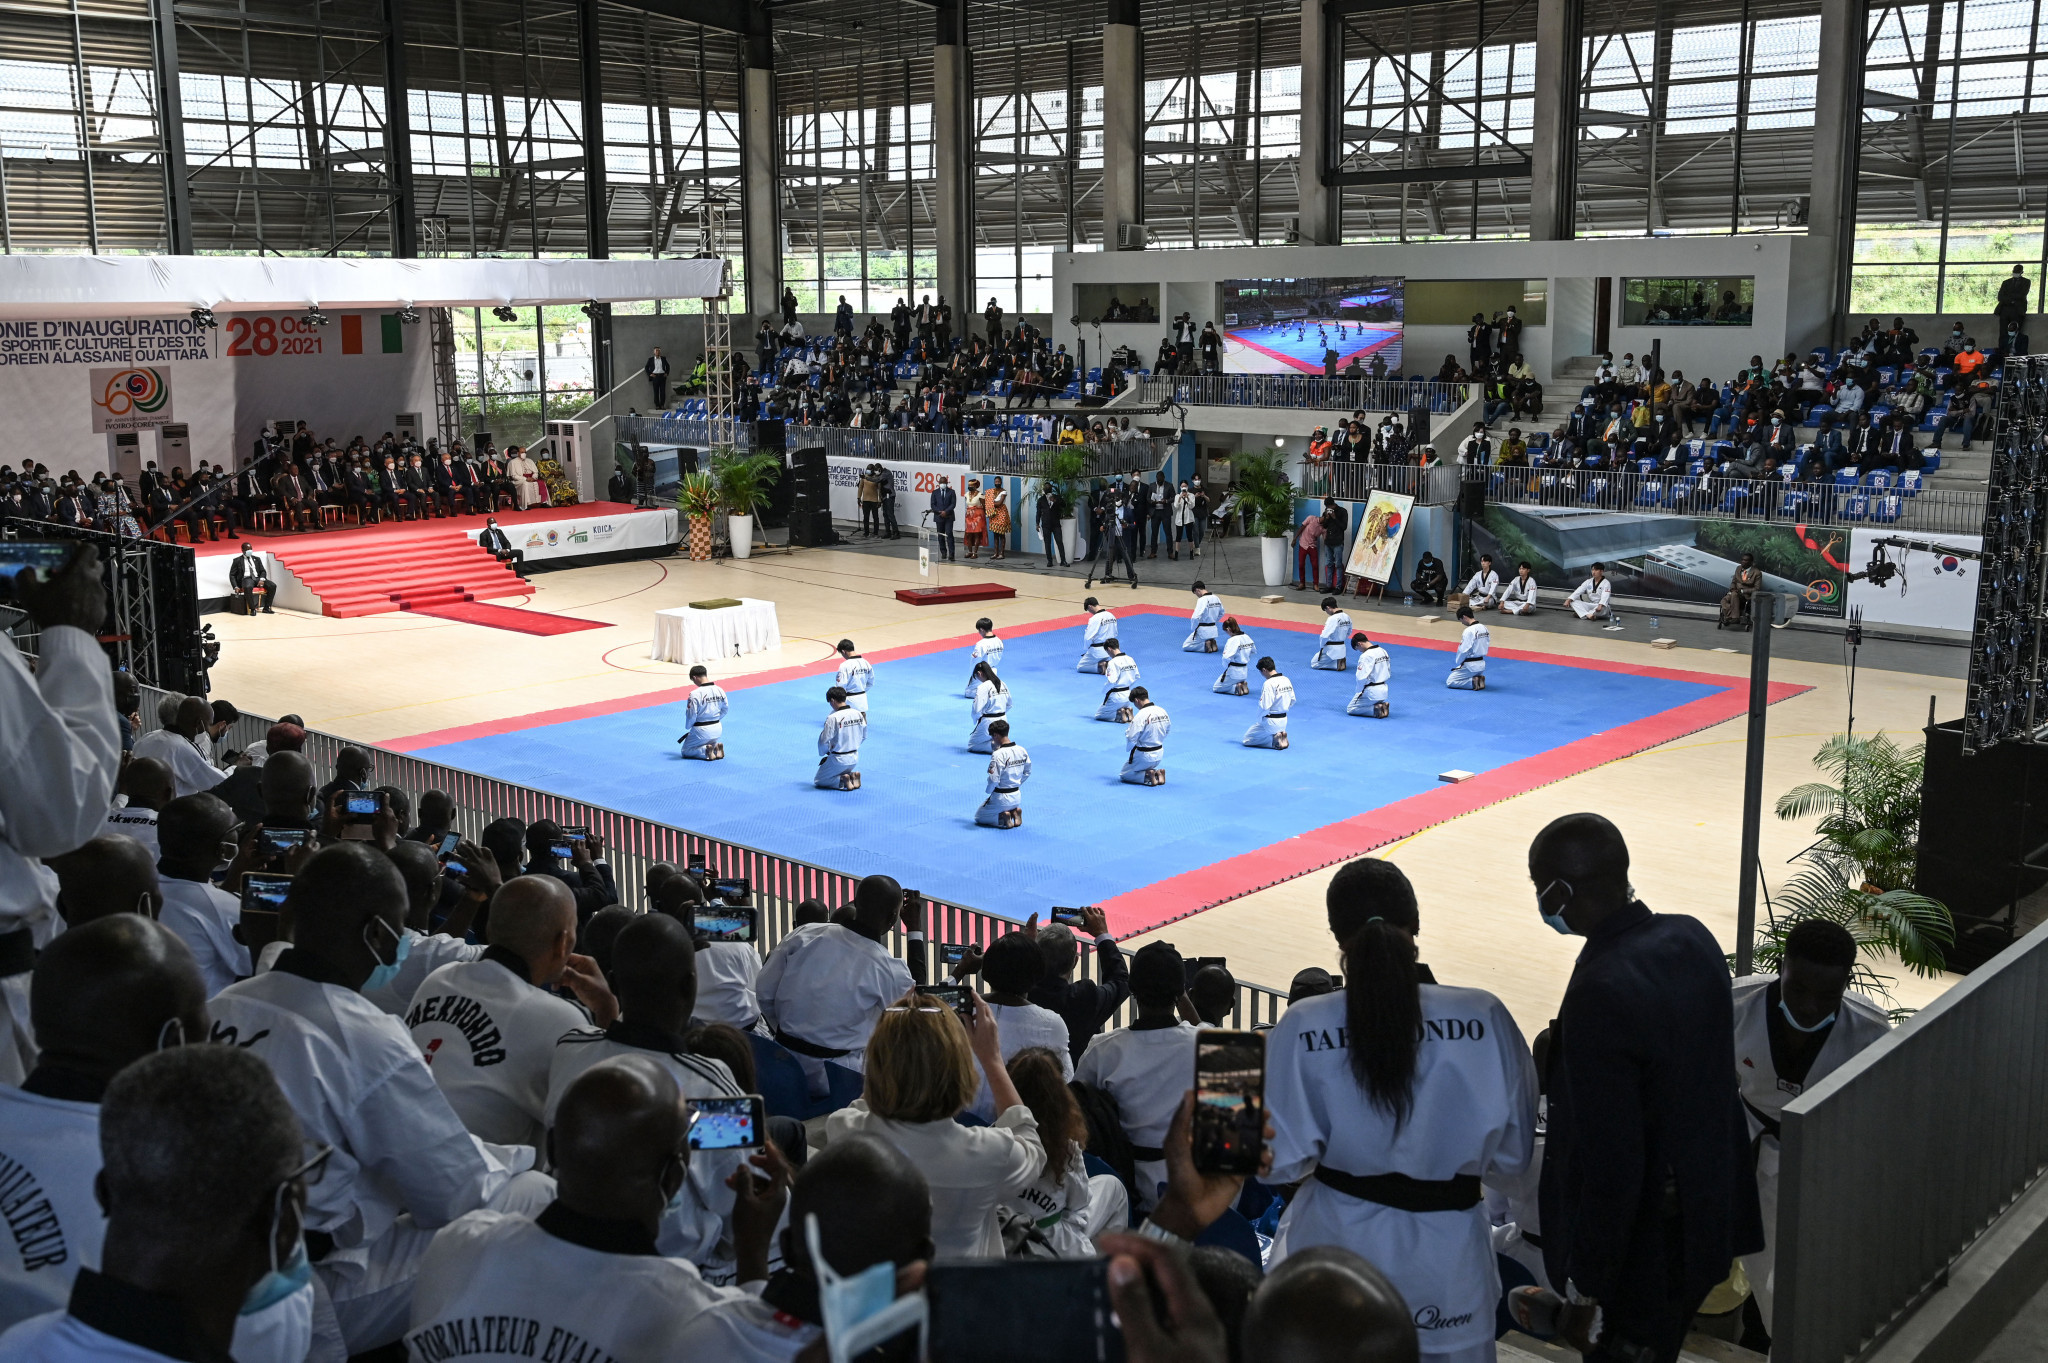 Abidjan in the Ivory Coast is due to play host to this year's African Taekwondo Championships in November ©Getty Images